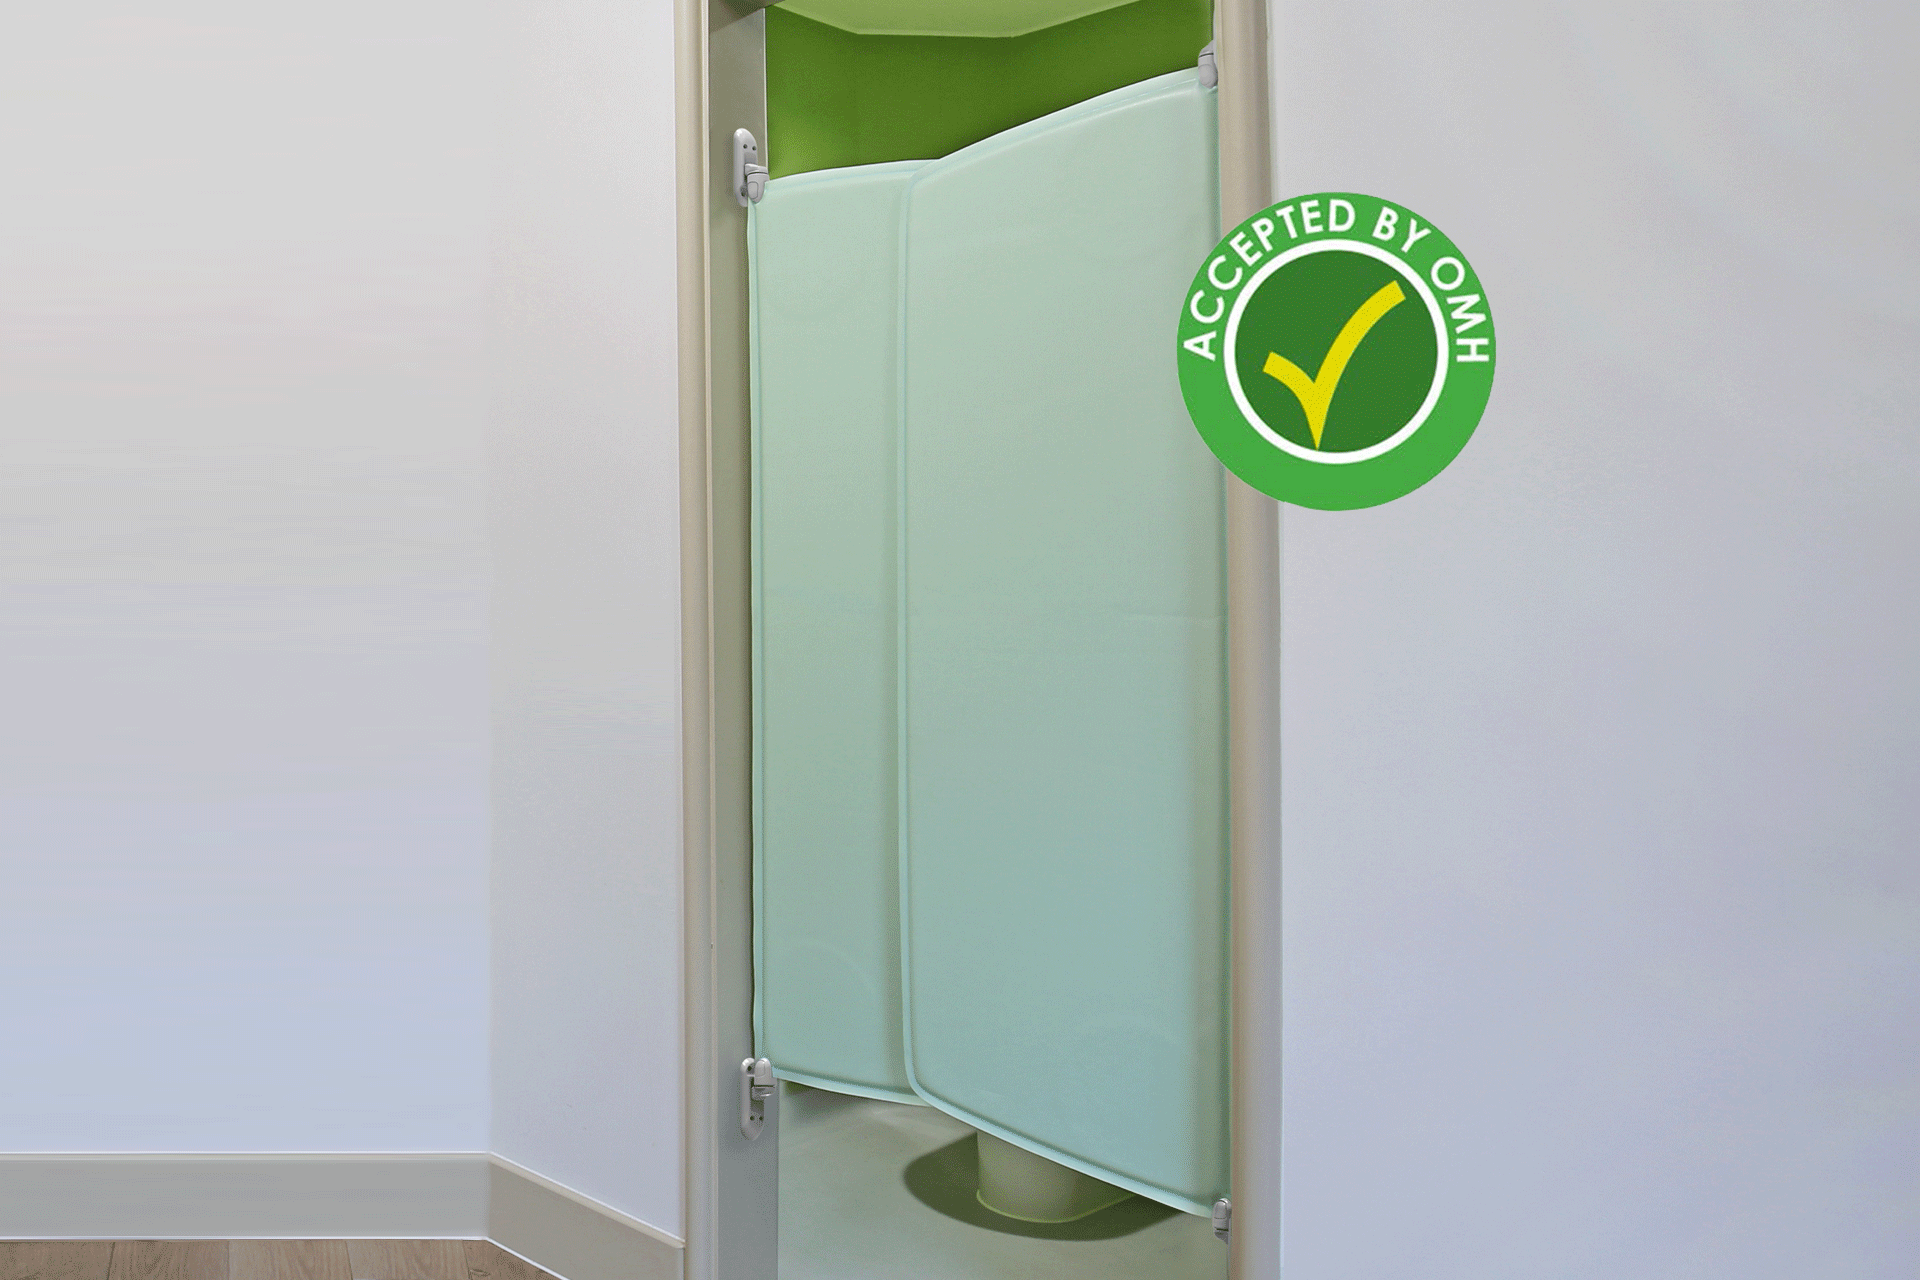 Bathroom door approved by all three behavioral health design guides